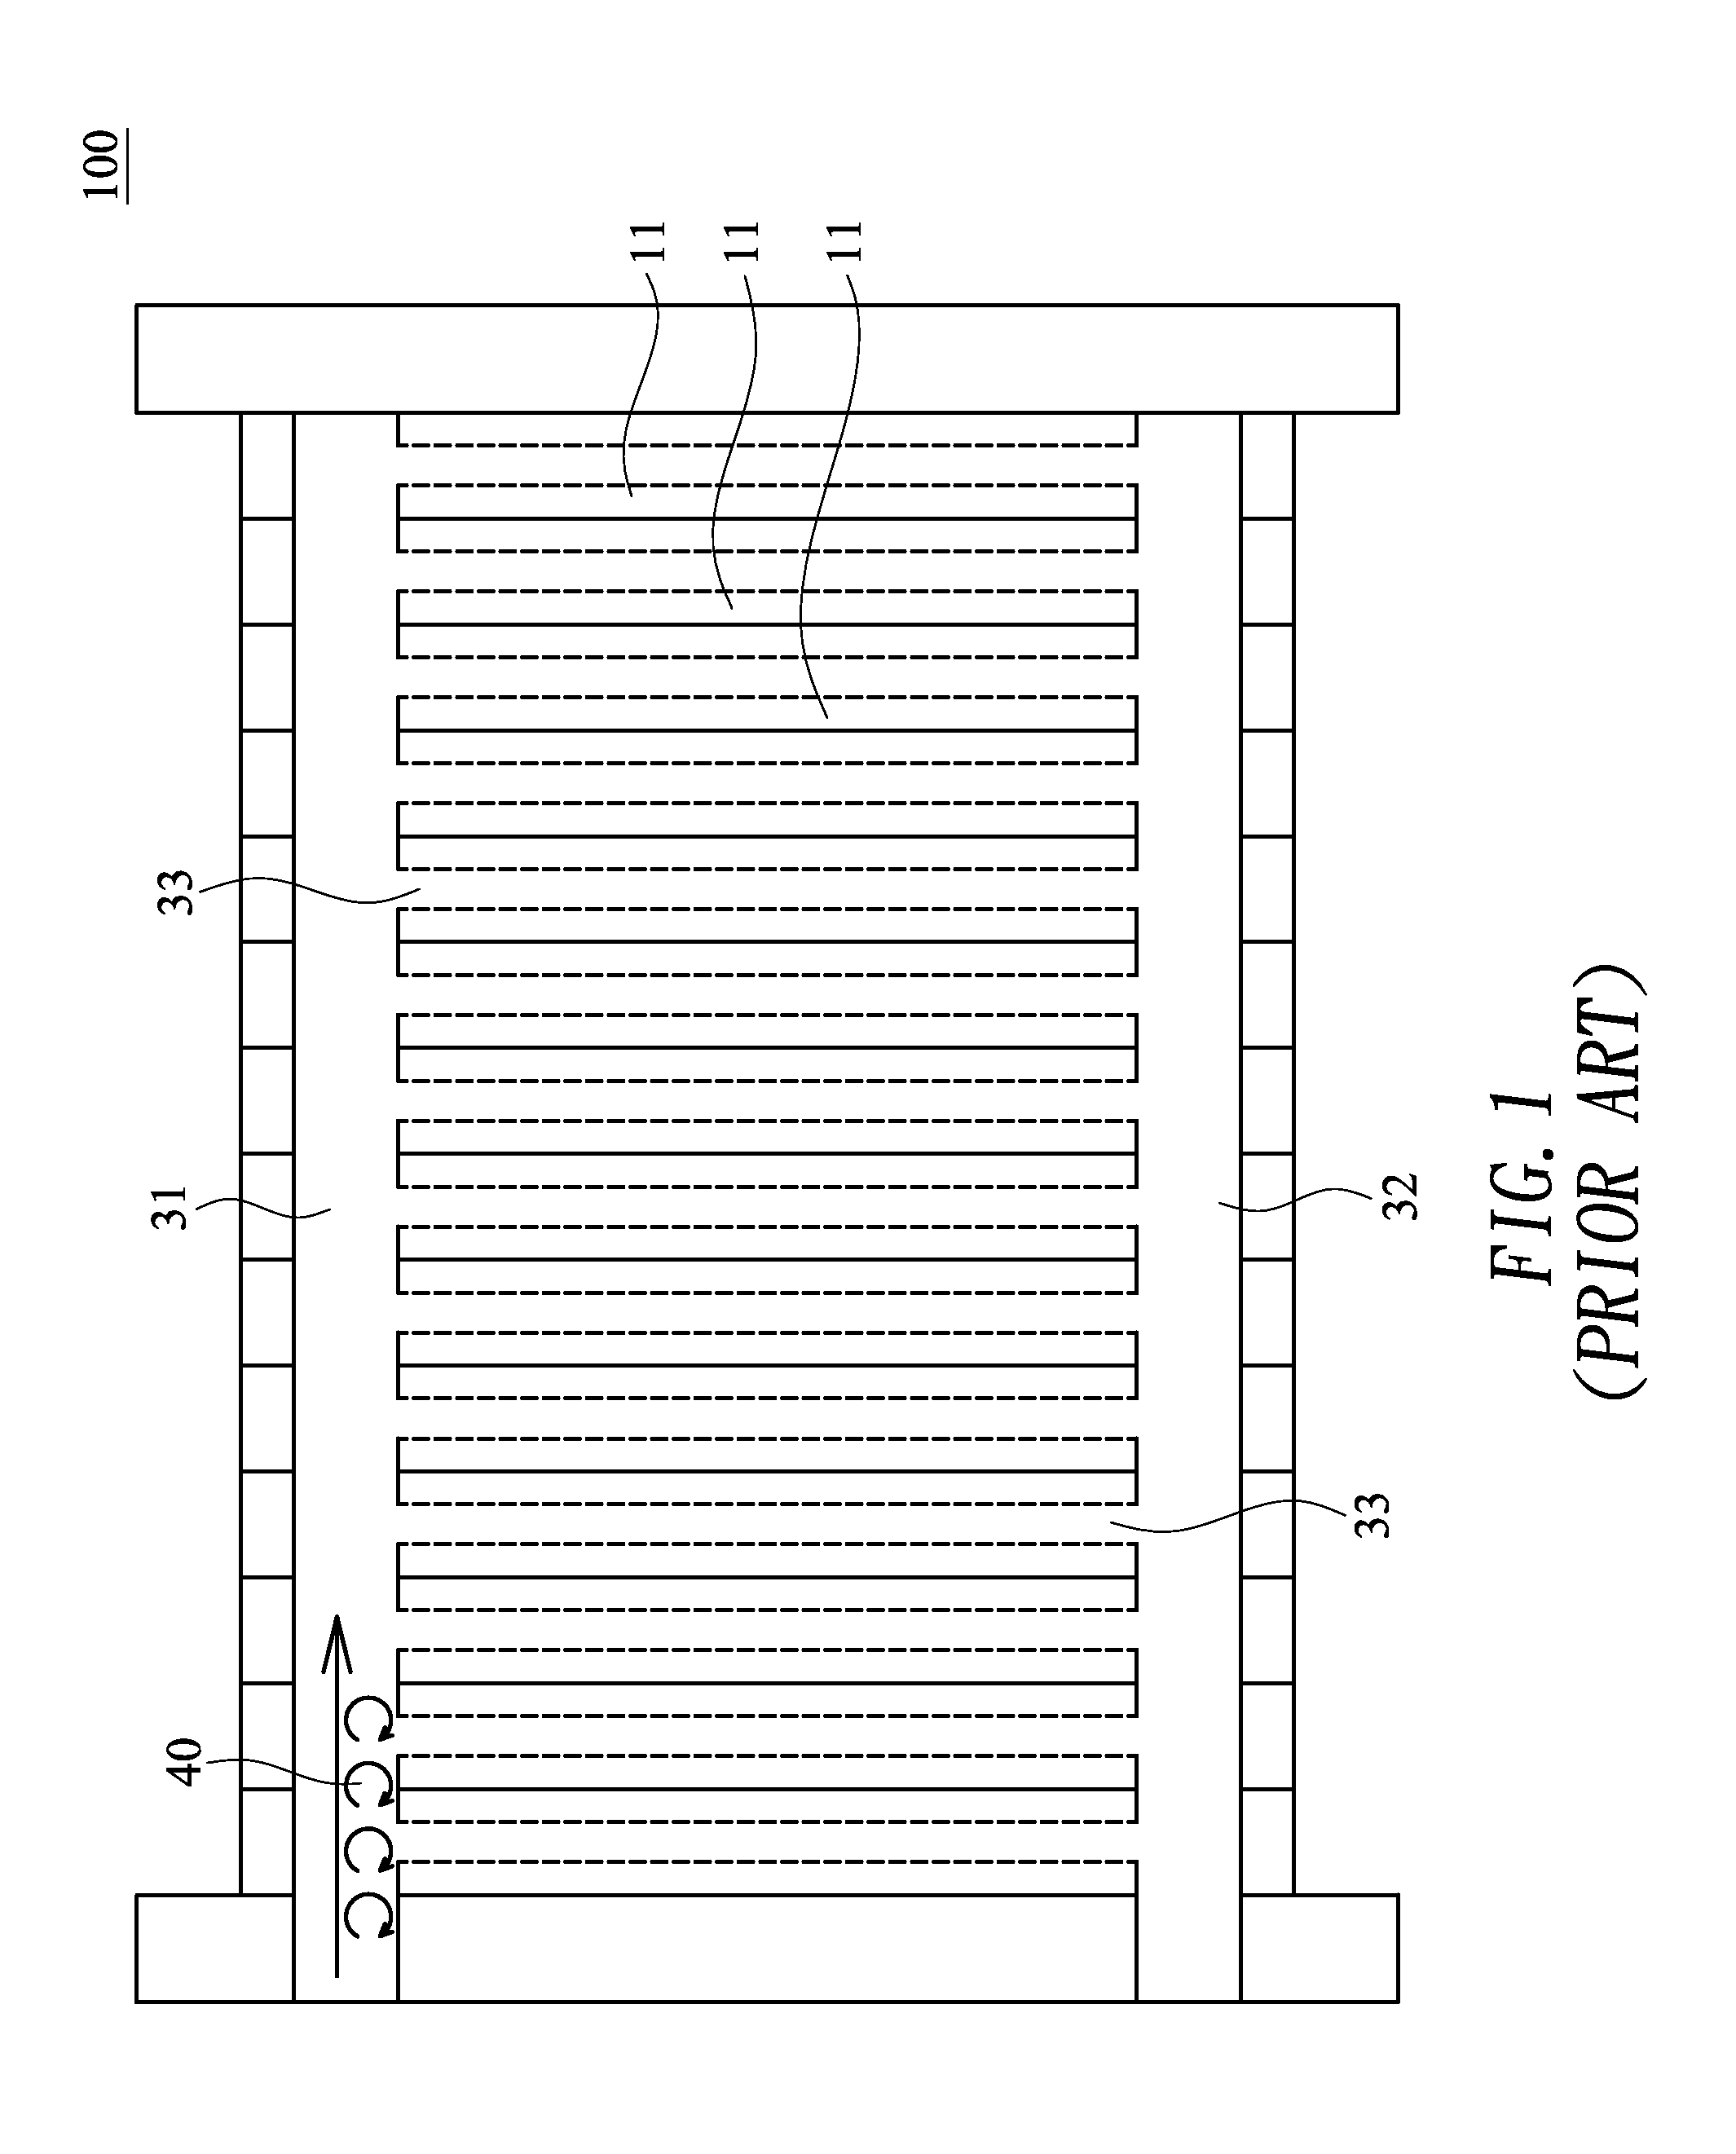 Fuel cell stack with uniform gas distribution in main flow channels thereof